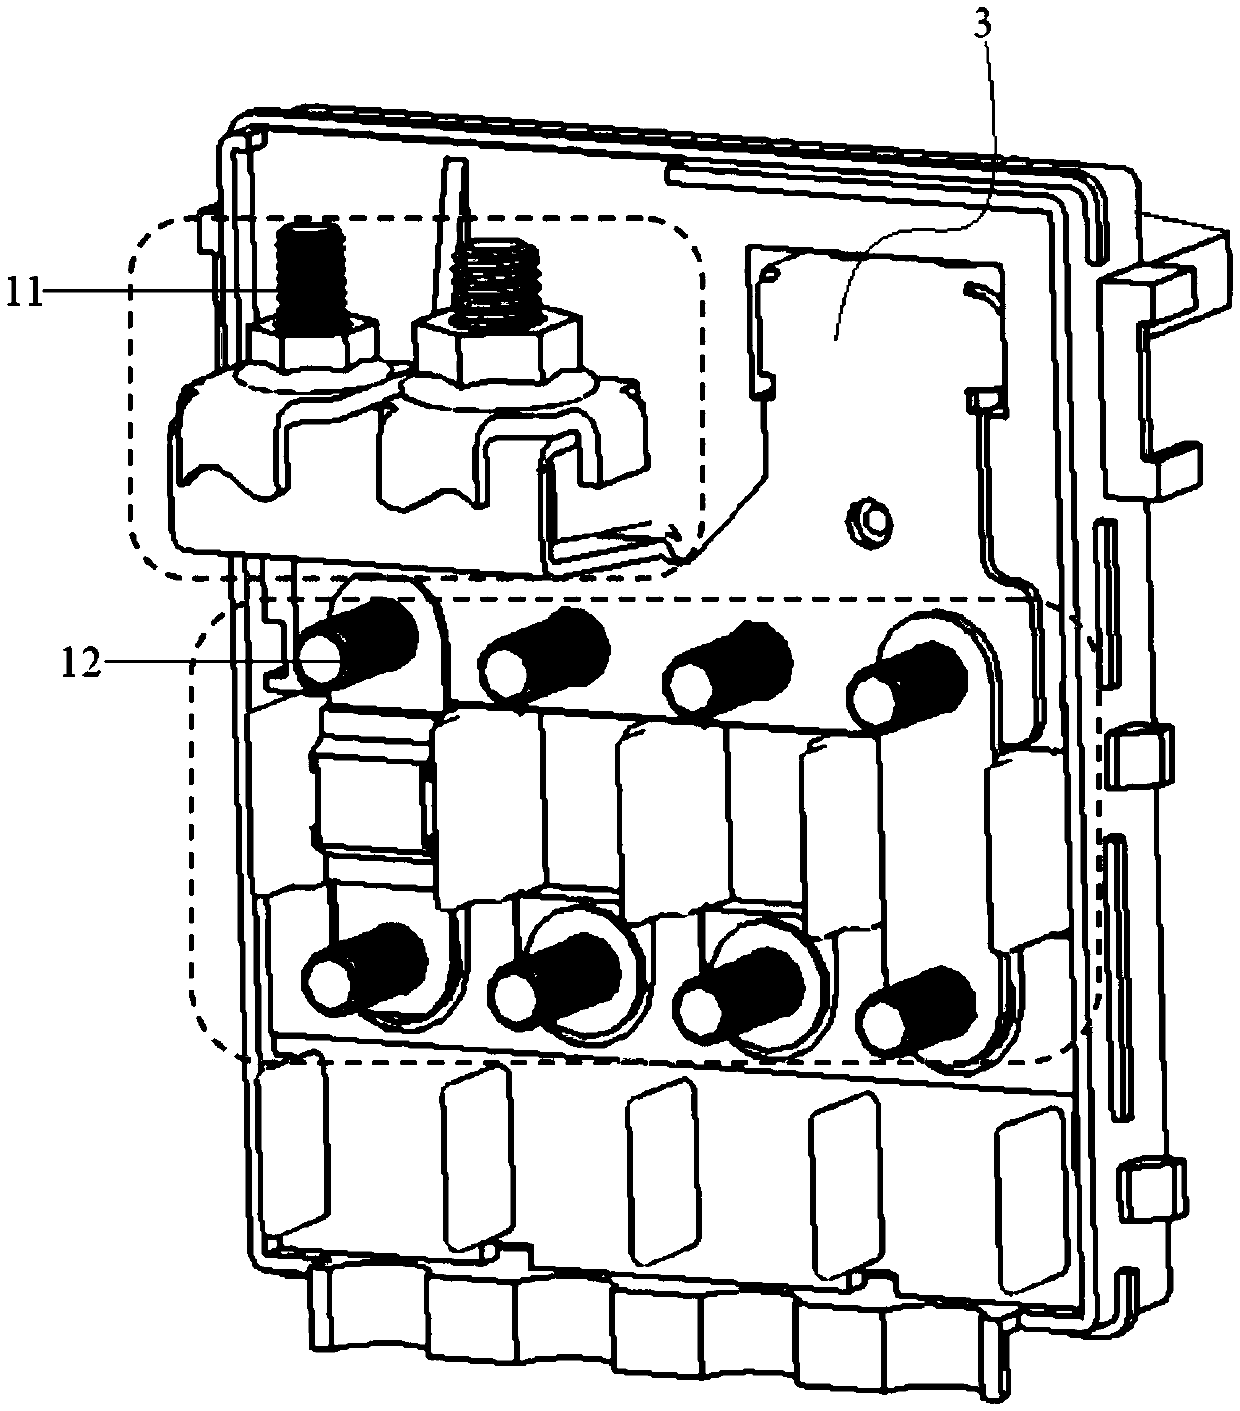 Positive-electrode joint fuse box and assembly for automobile storage battery